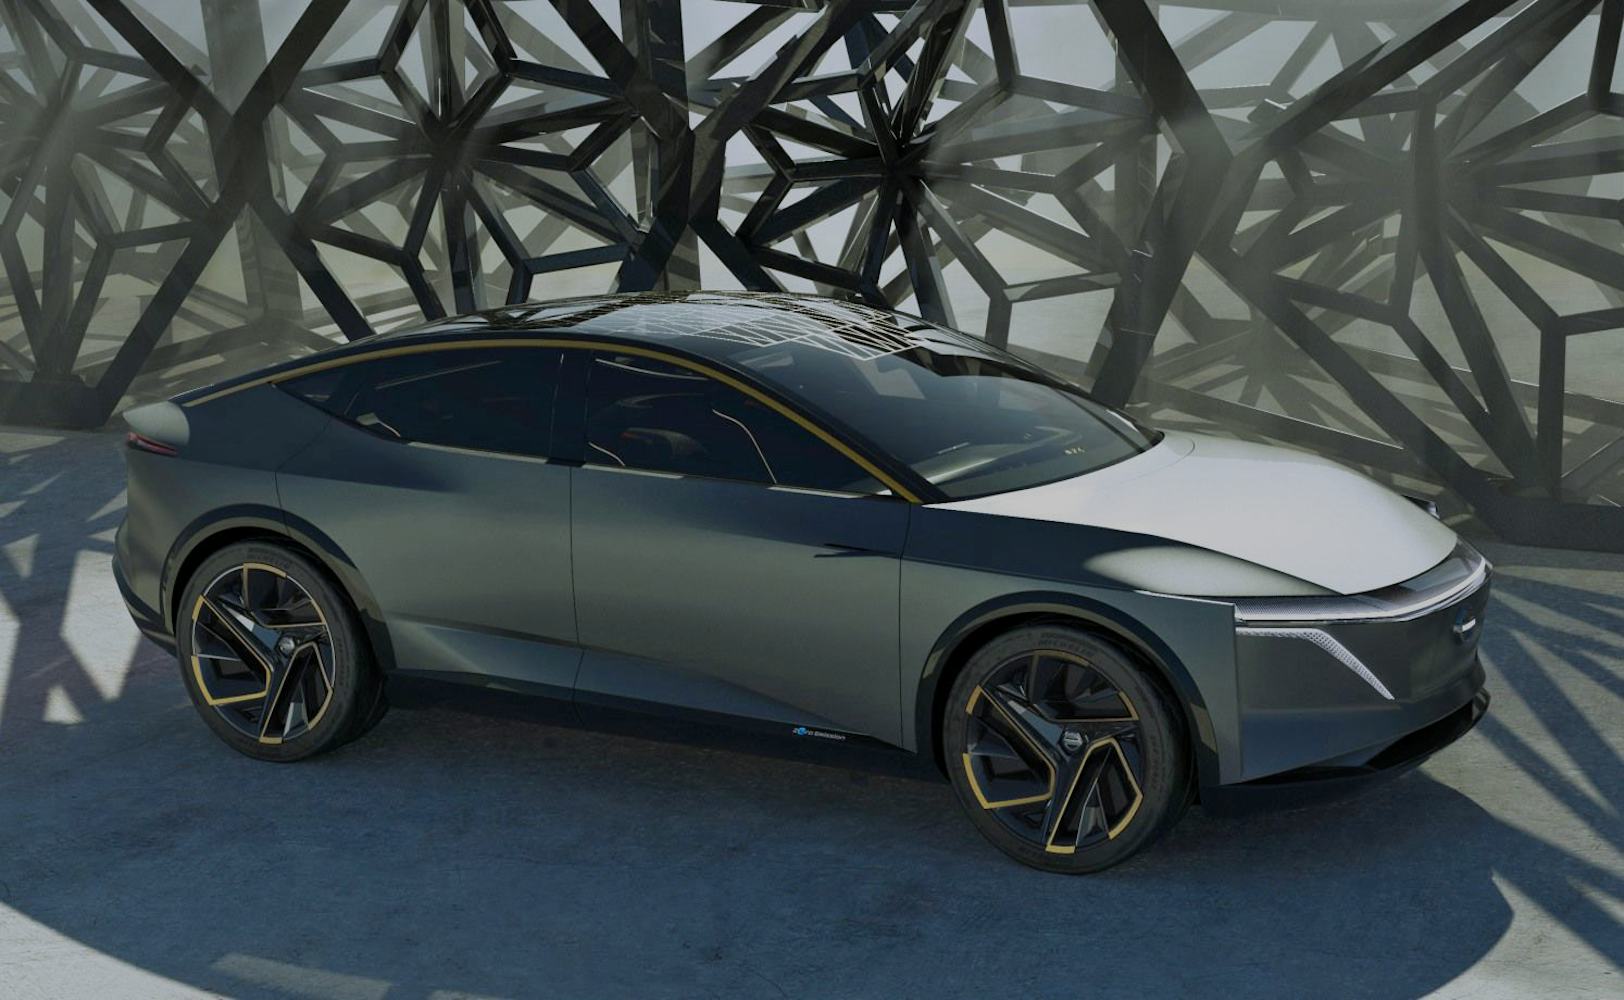 3 of the Most Futuristic Electric Car Concepts Unveiled at NAIAS 2019